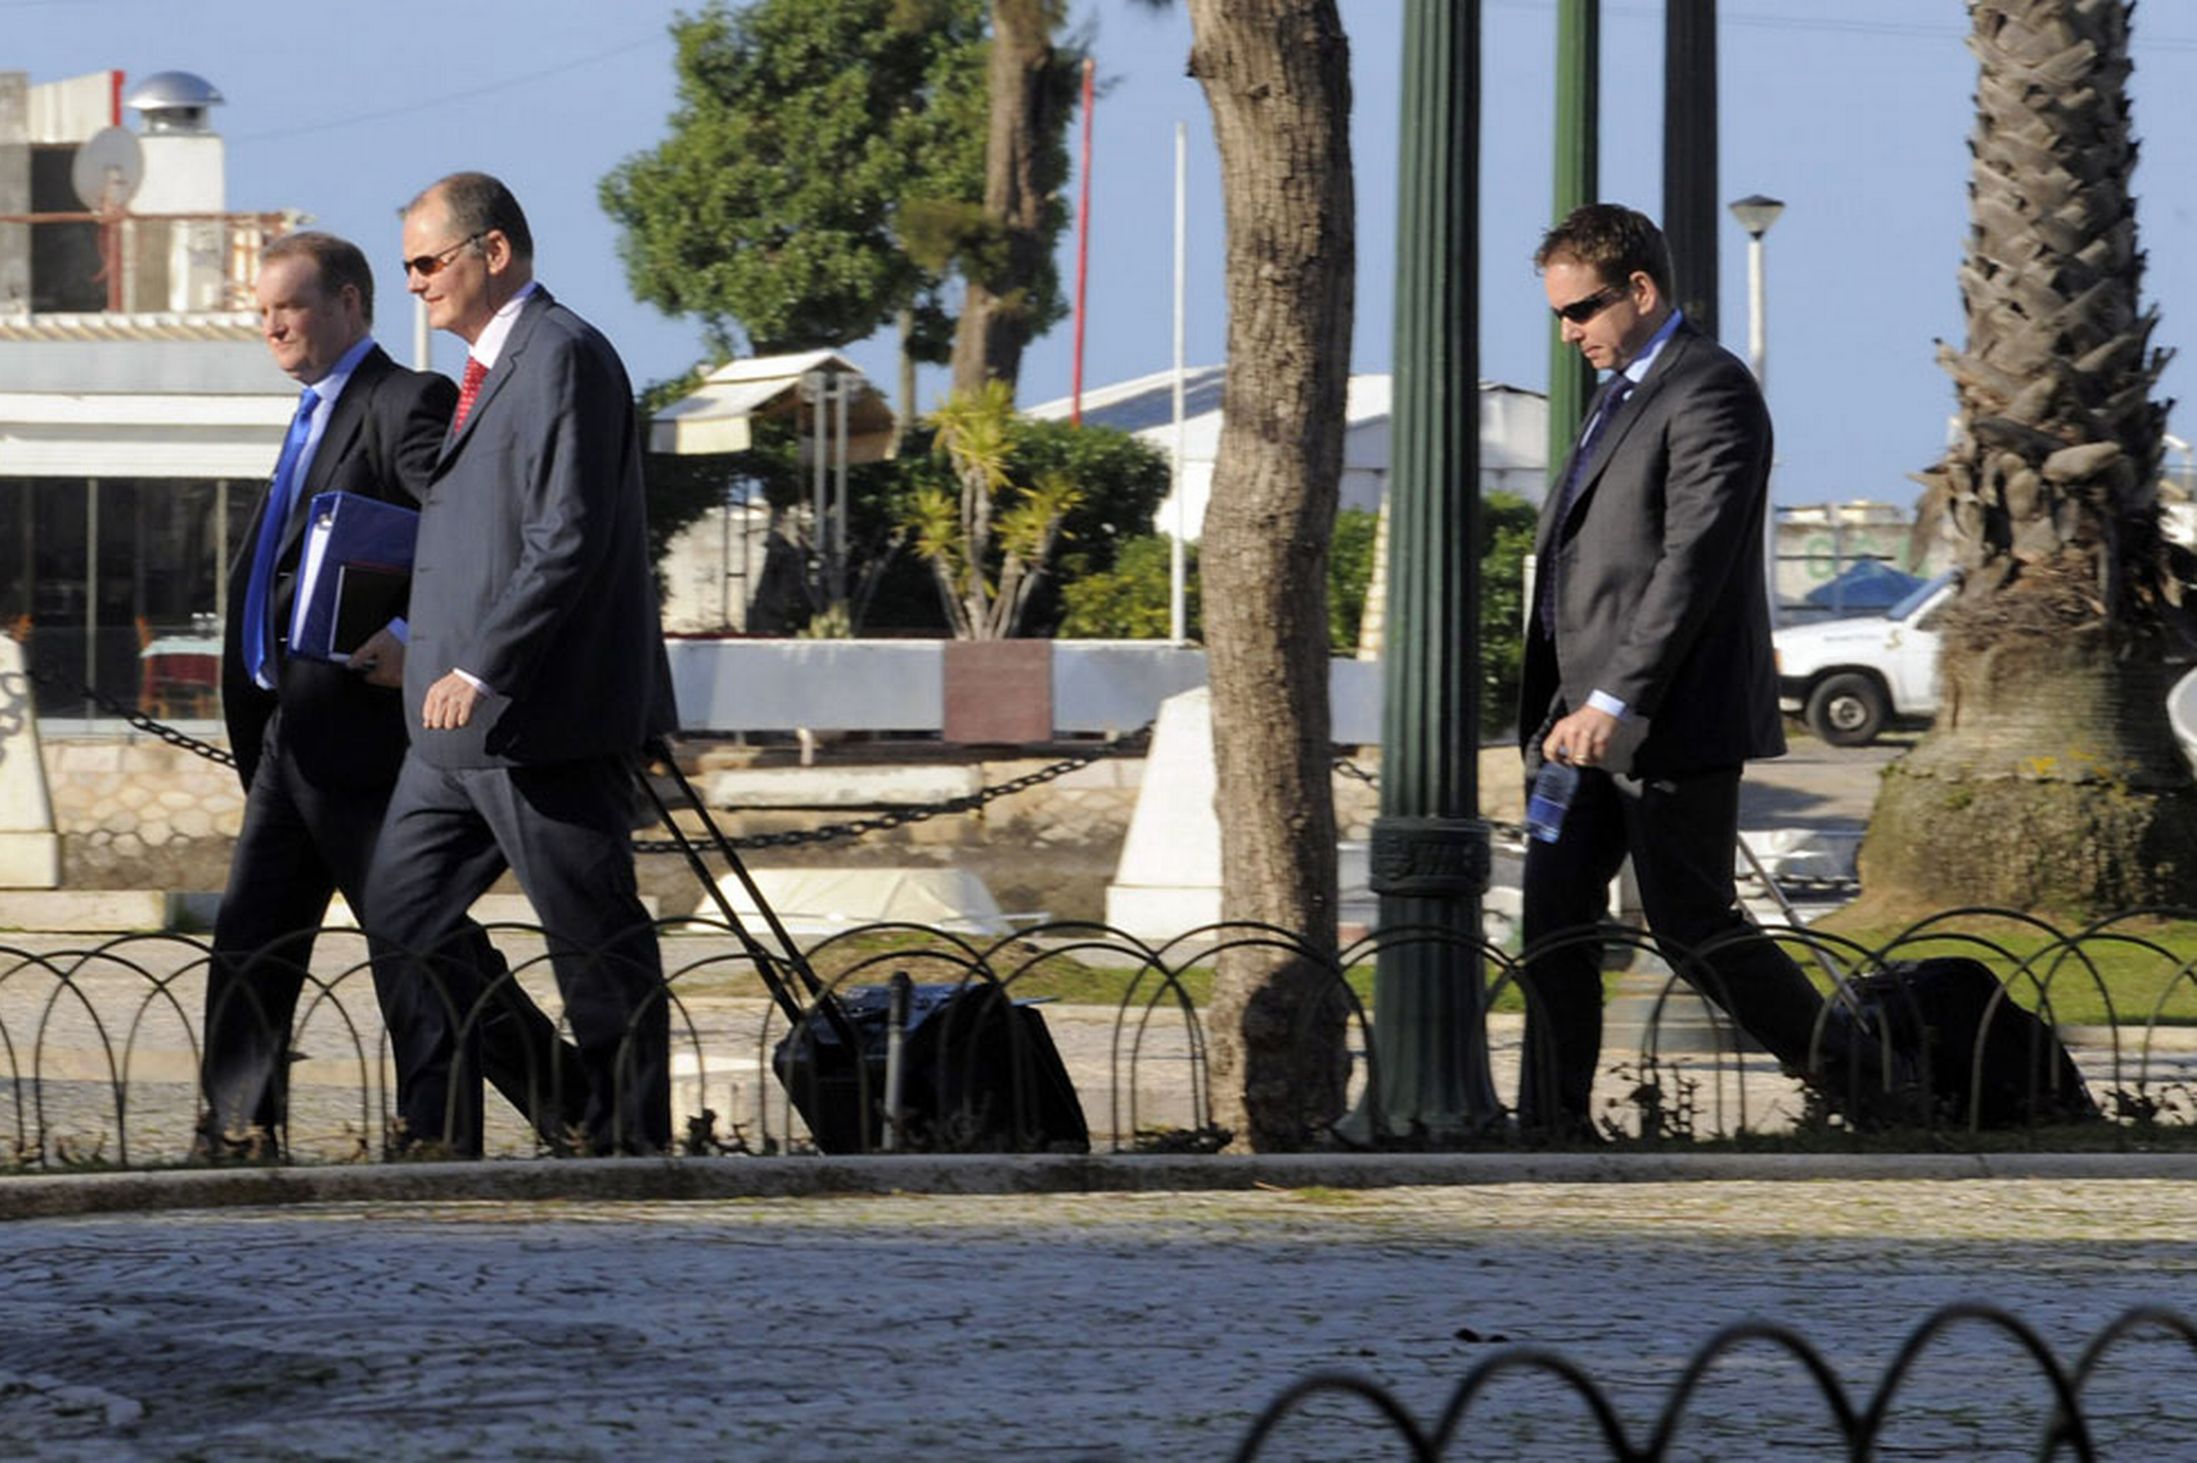 They headed a meeting with portuguese investigation police relating to the Madeline McCann case, which was attended by current police investigation Director Mota Carmo